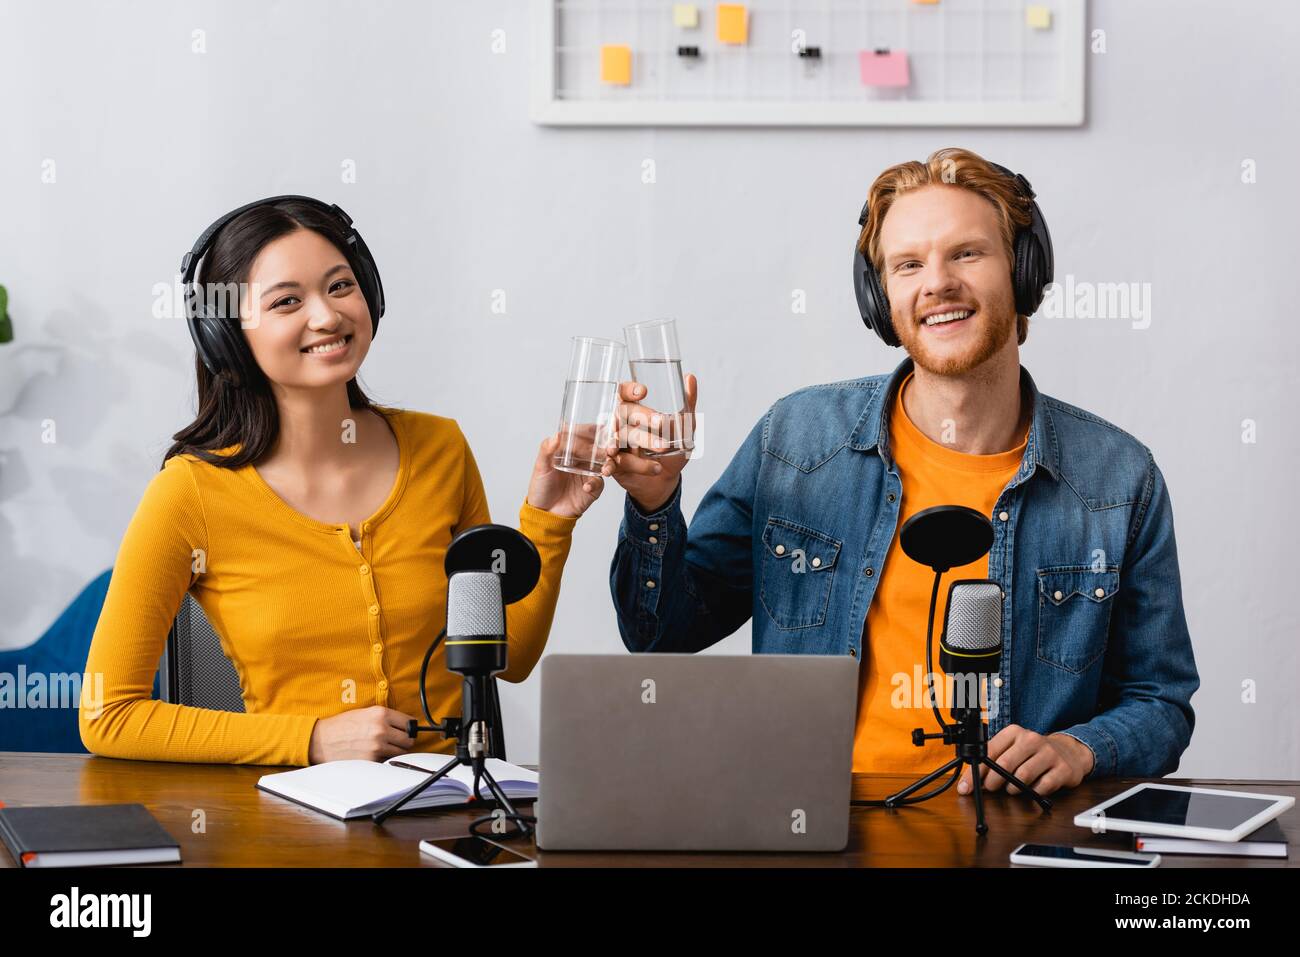 interracial couple of broadcasters in wireless headphones clinking glasses of water while looking at camera Stock Photo